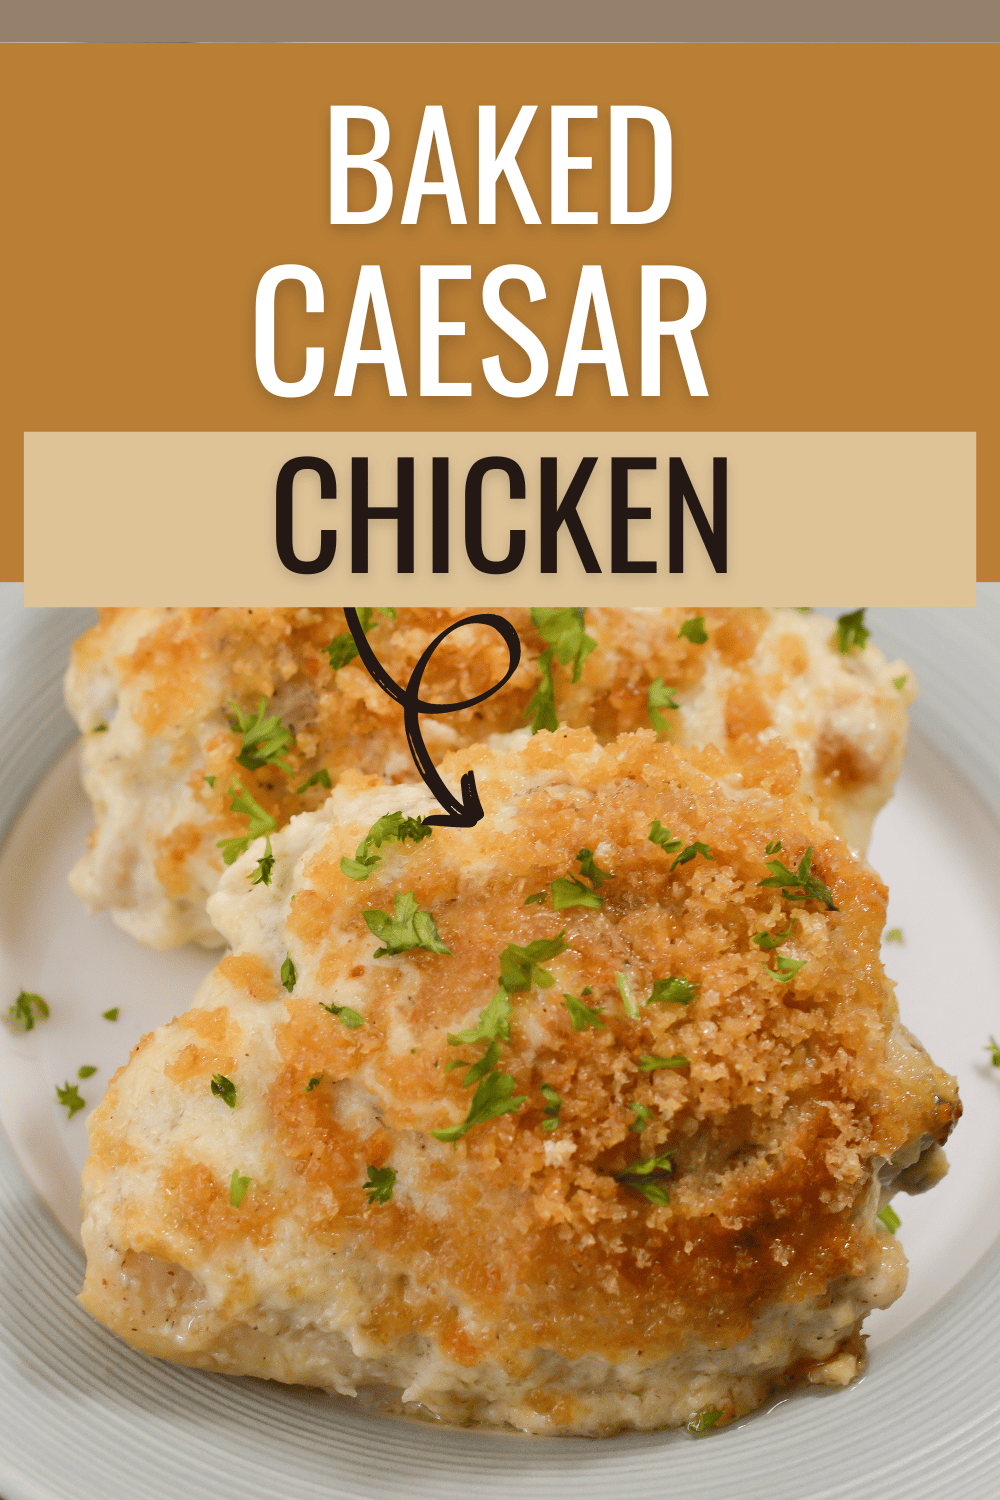 This Baked Caesar Chicken is easy to make and takes only minutes to prepare. It’s a great way to make a delicious, healthy dinner! #caesarchicken #bakedcaesarchicken #bakedchicken #chickendinner via @wondermomwannab